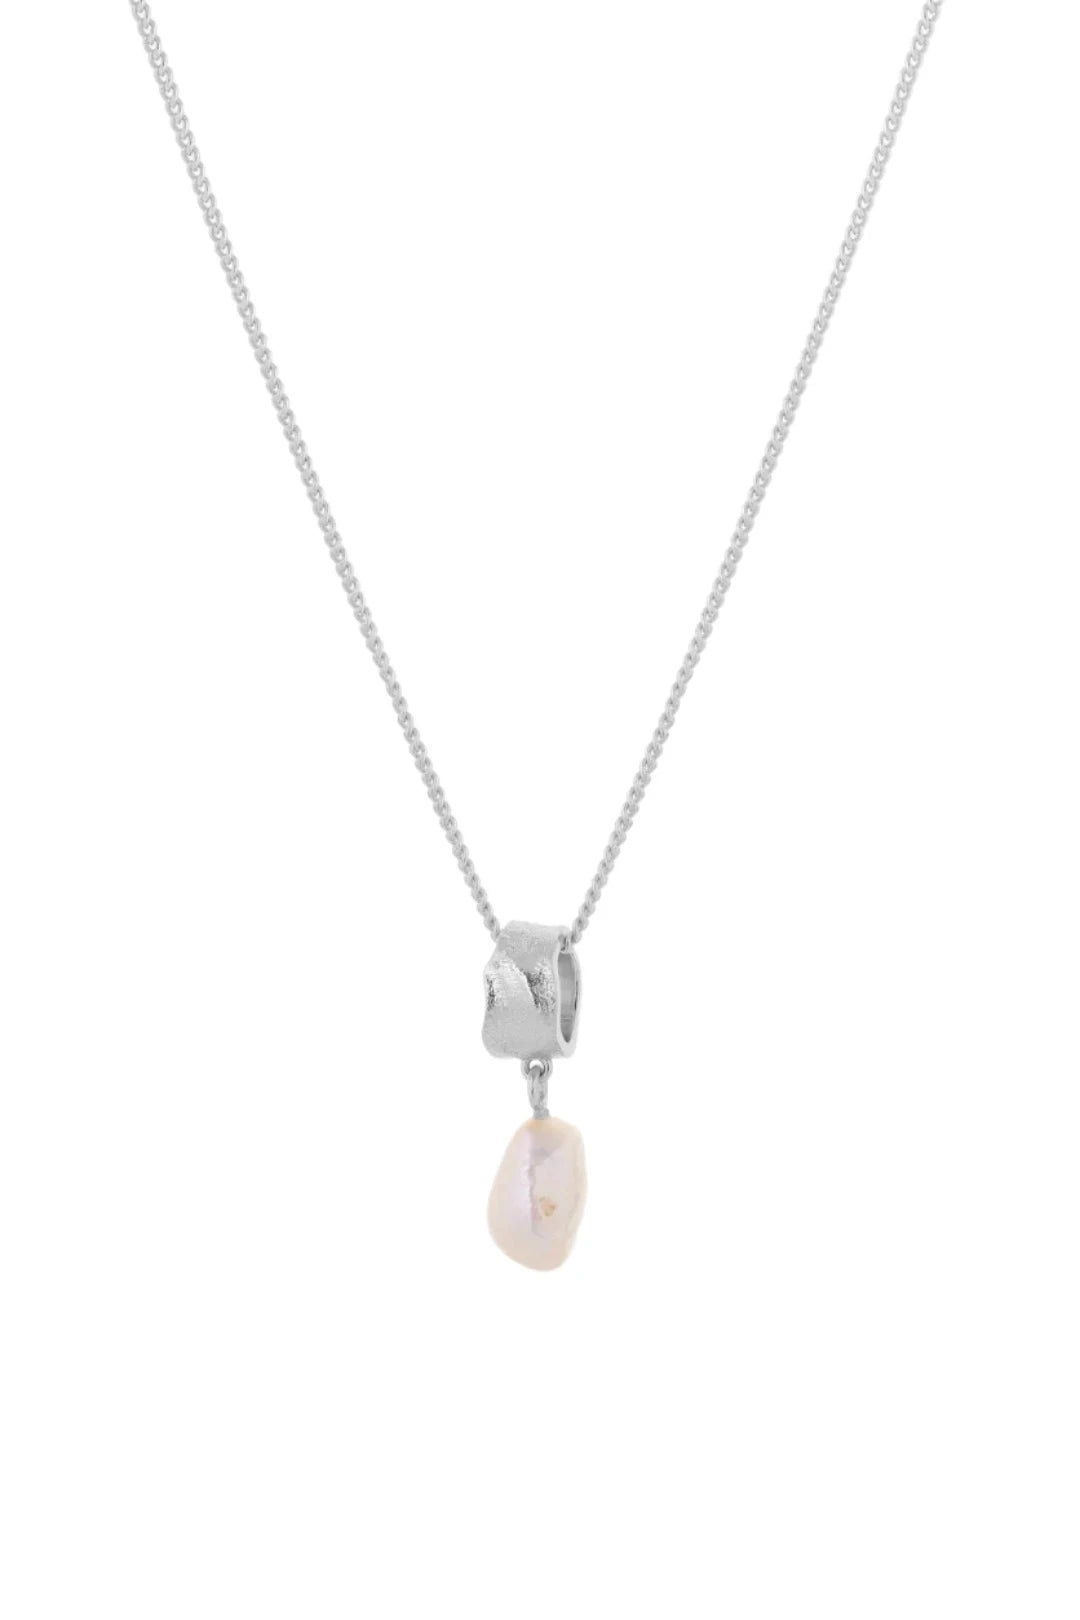 Freshwater Pearl Necklace Silver